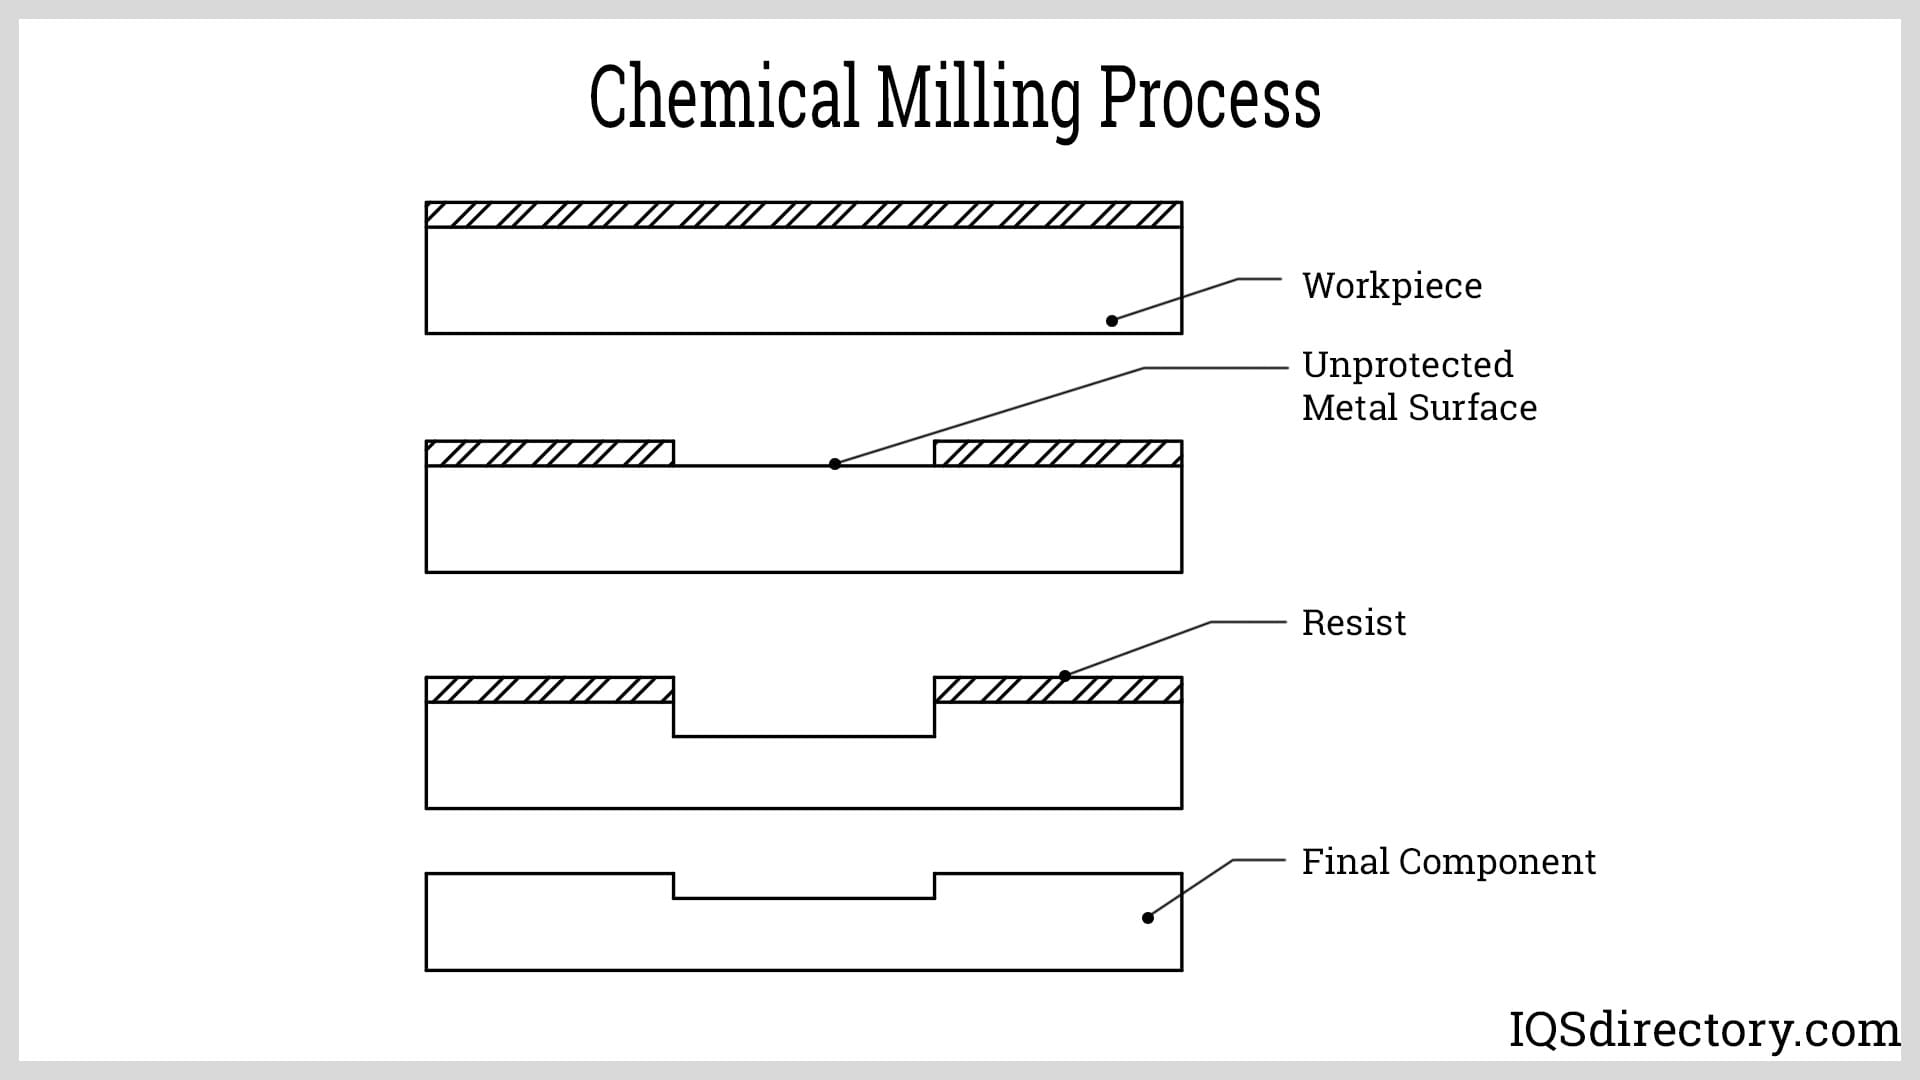 Chemical Milling Process